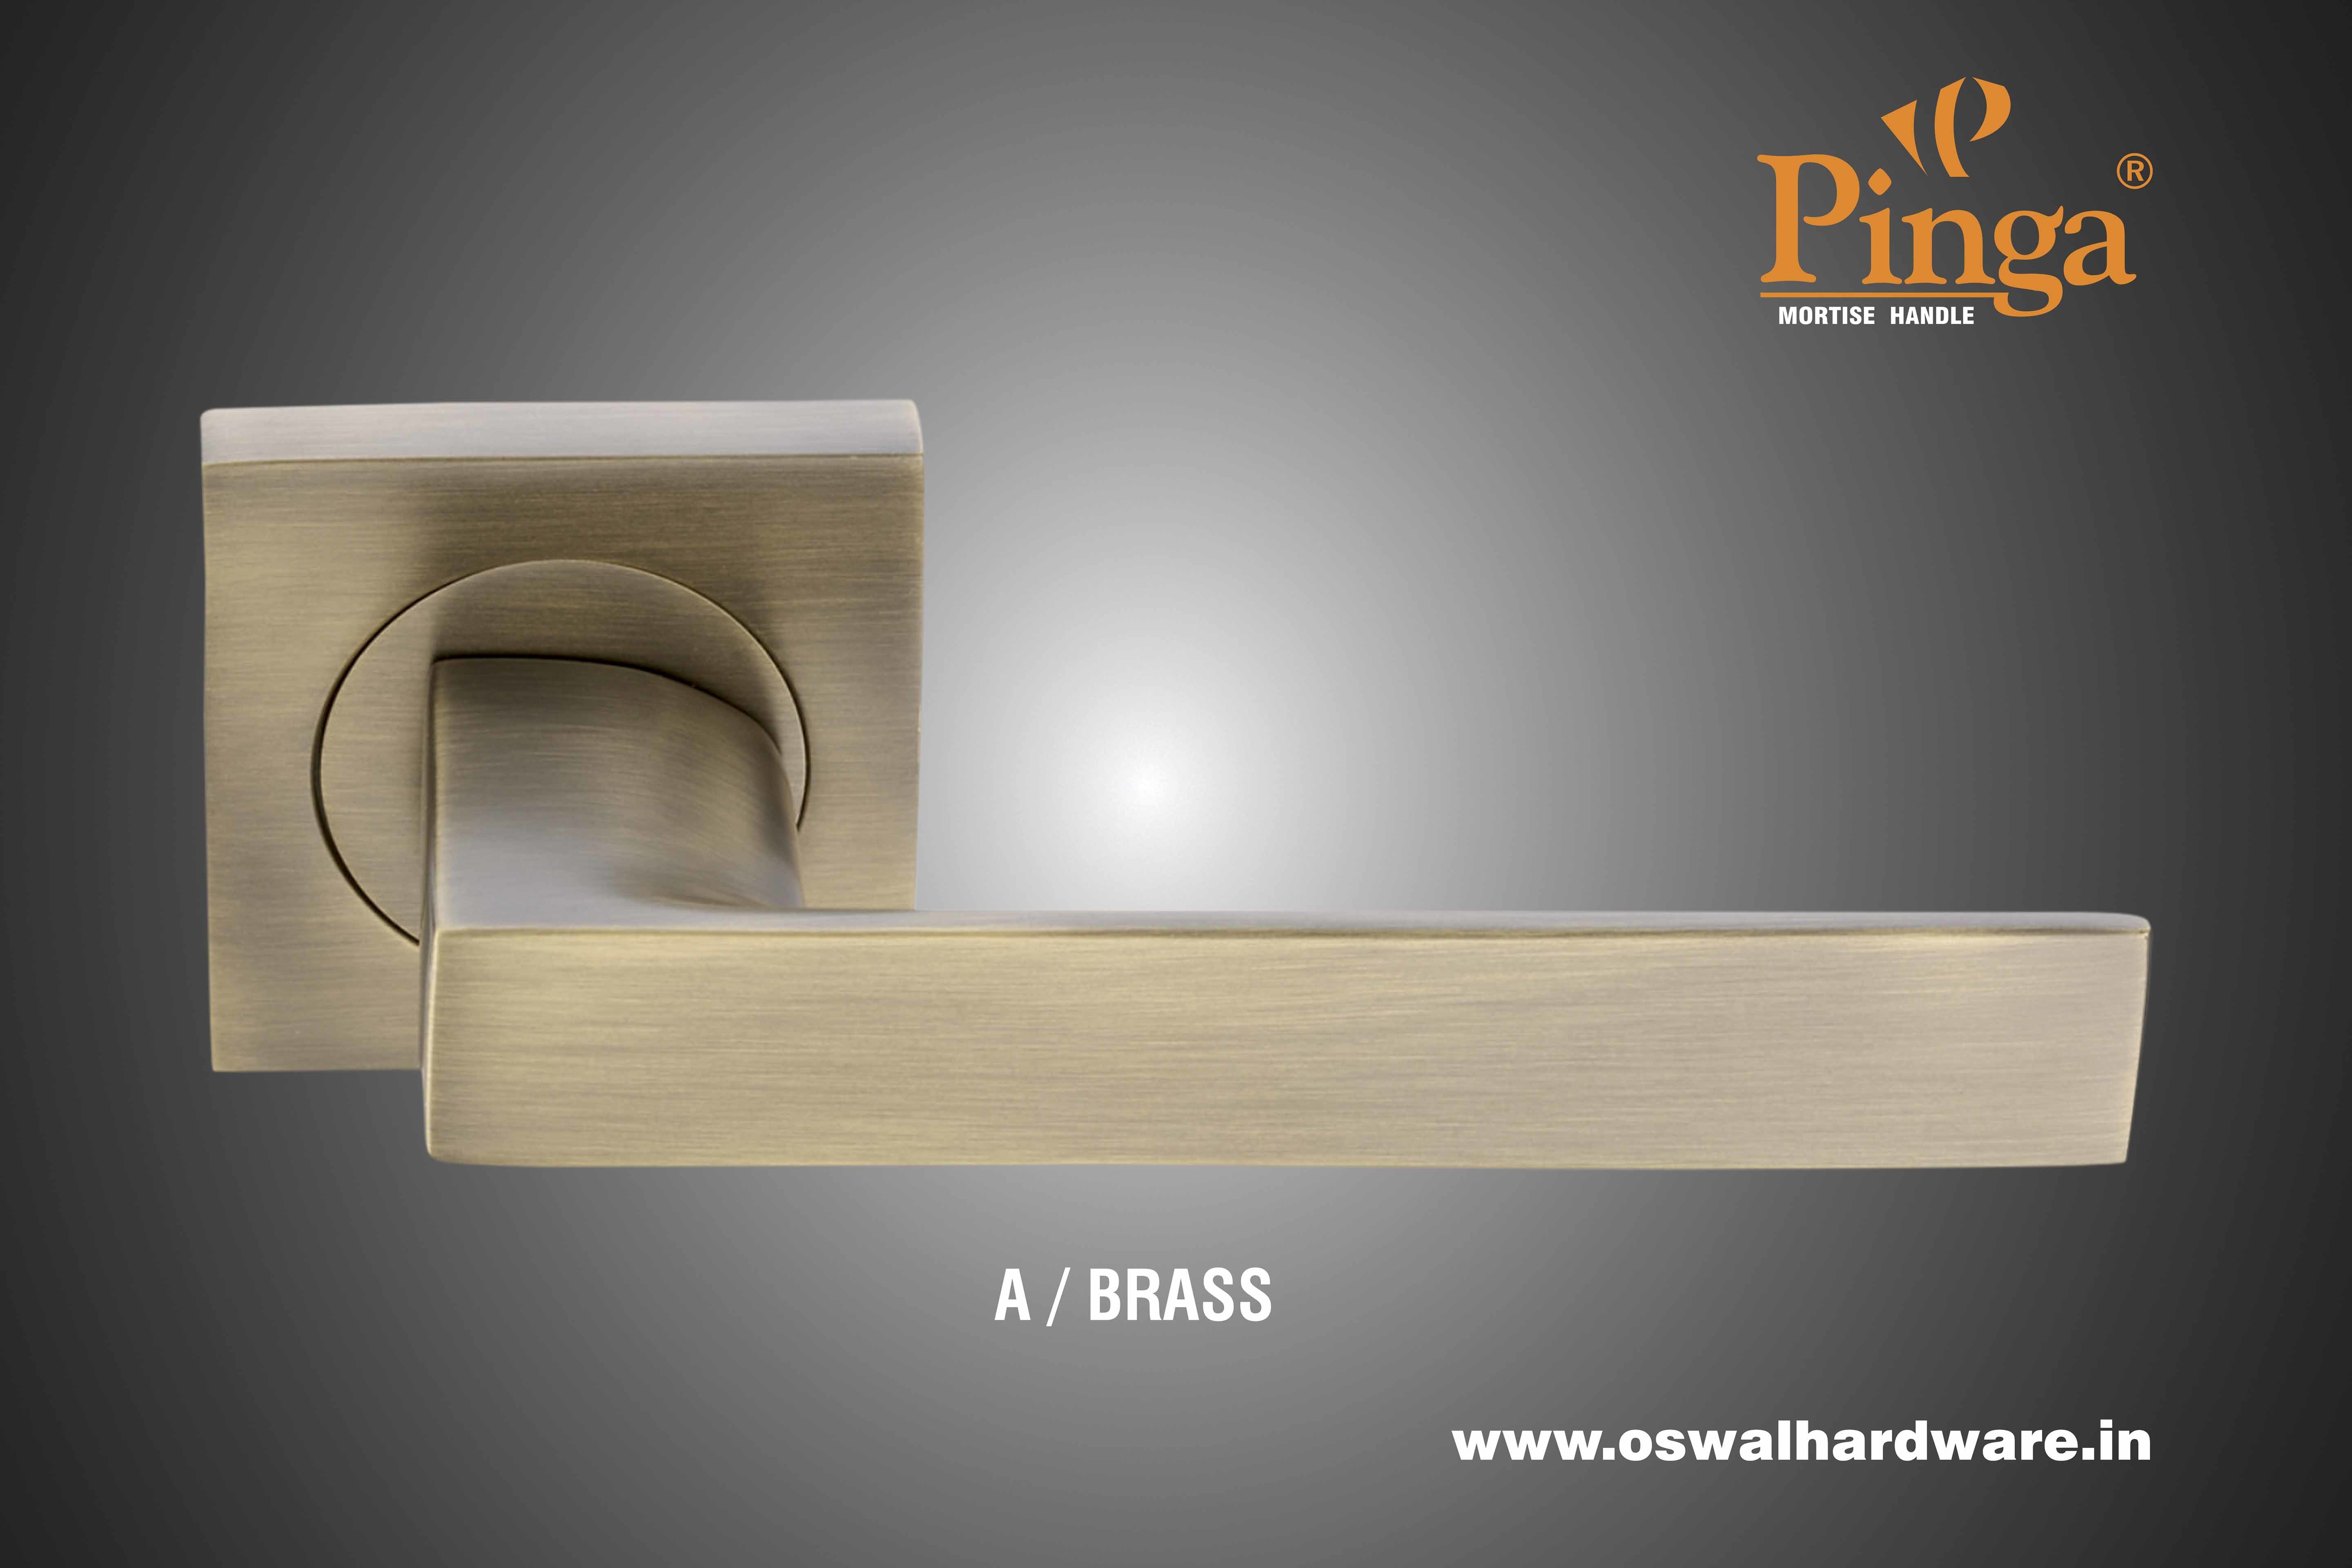 Mortise Handle Brass 2012